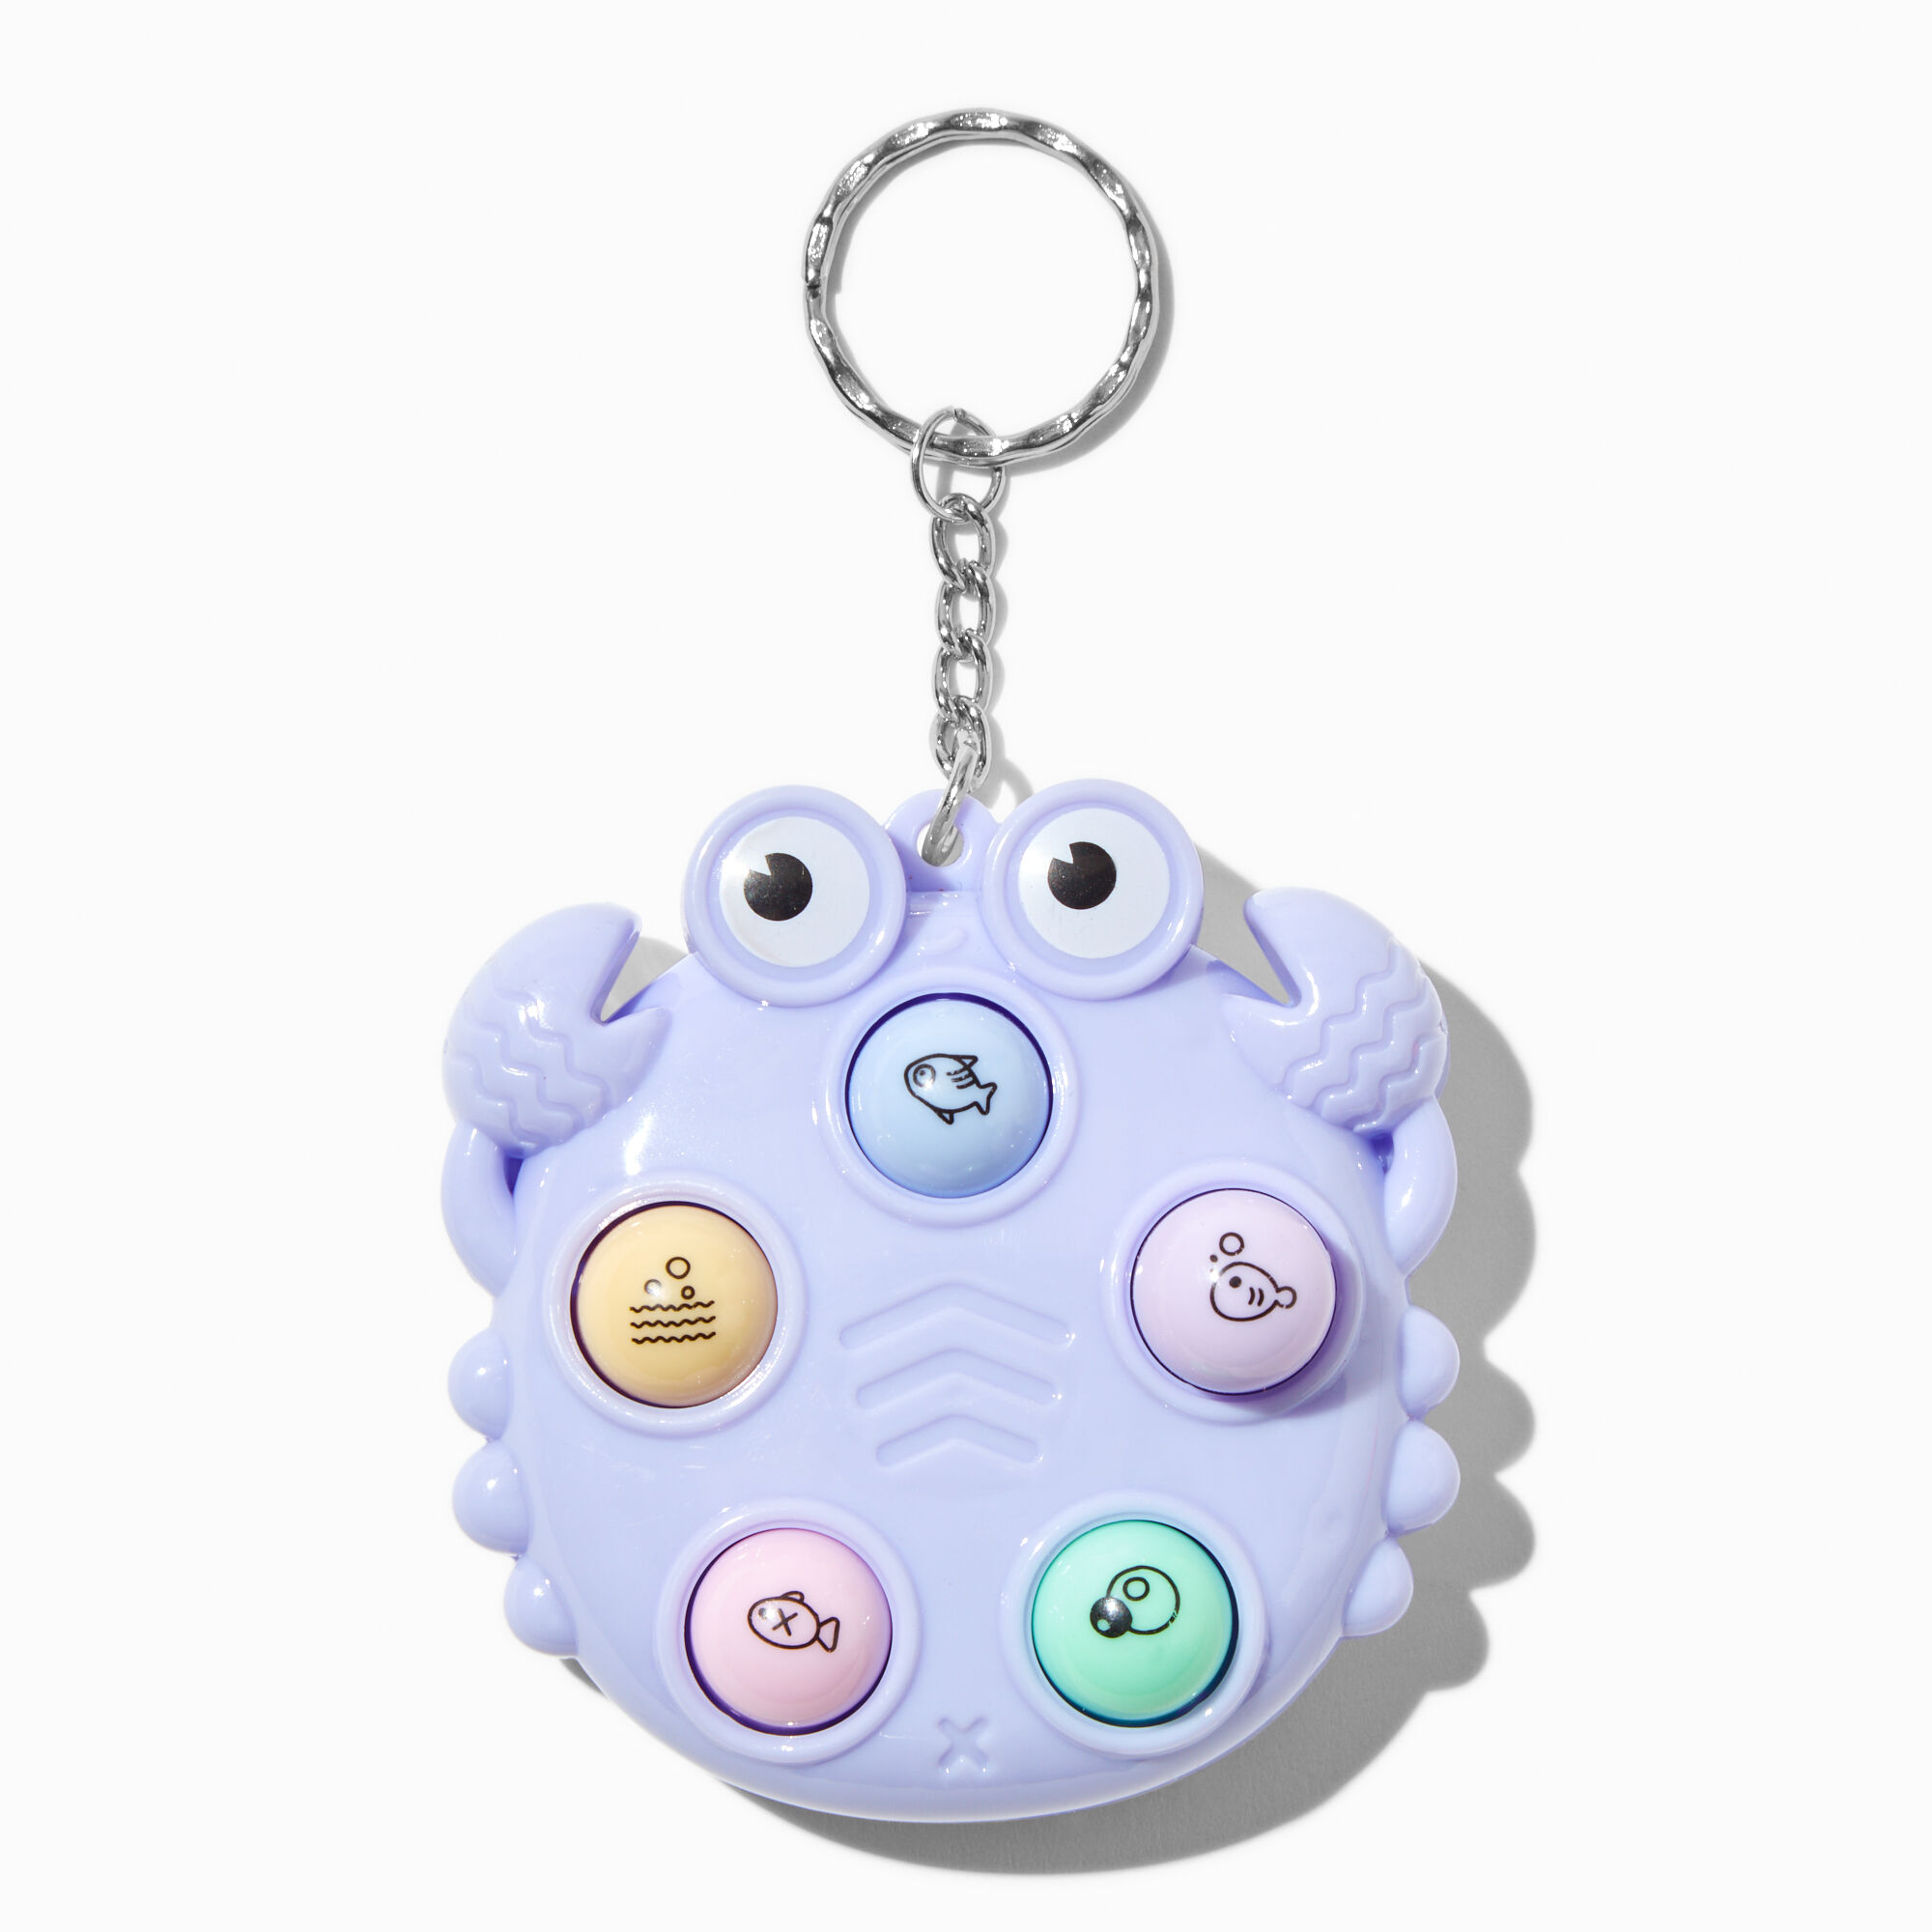 View Claires WhackAMole Crab Game Keyring information